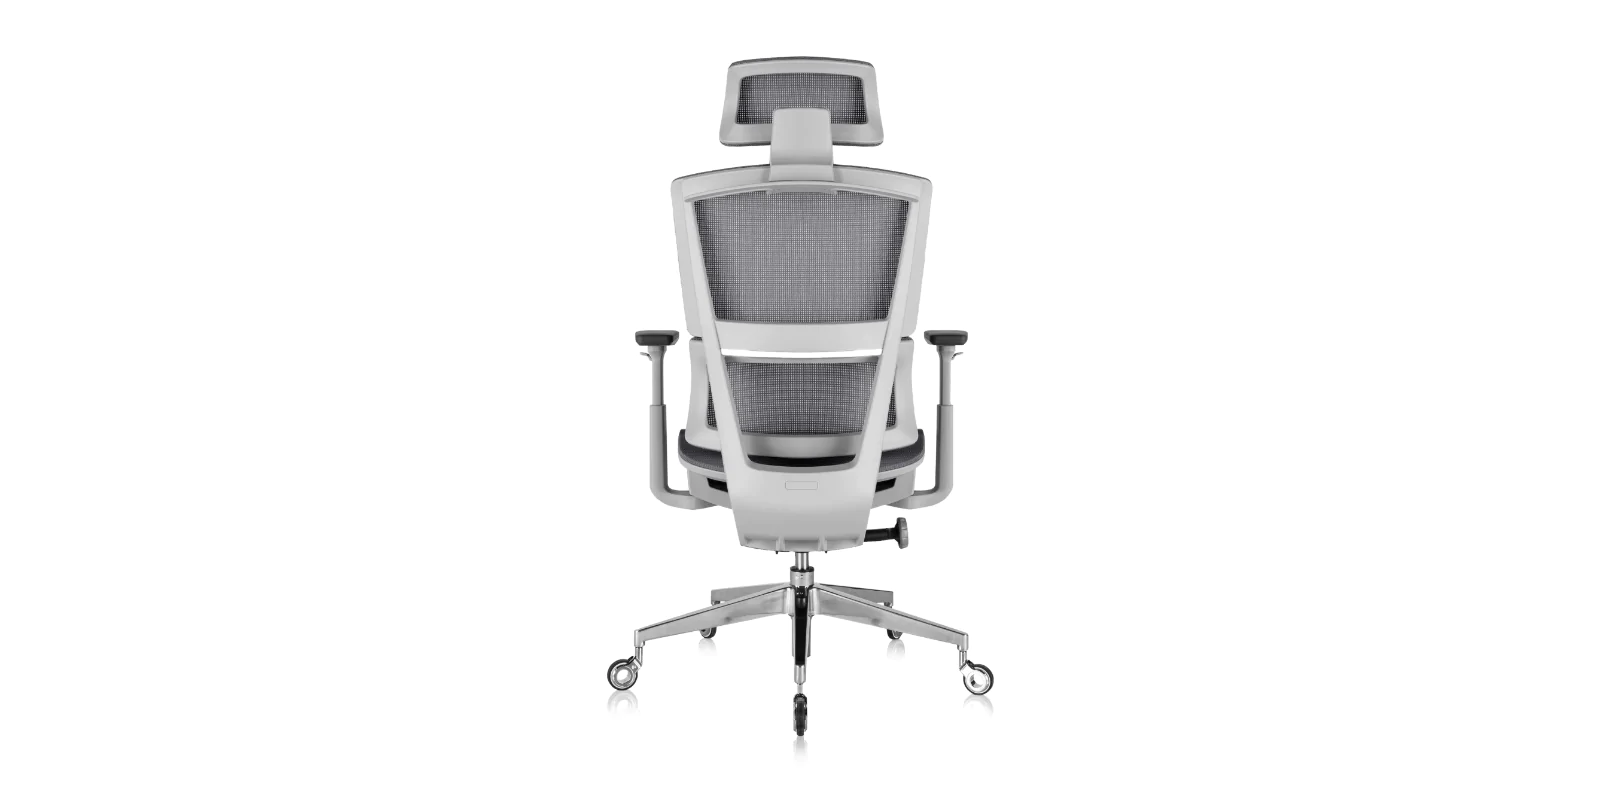 How do ergonomic chairs with lumbar support work?